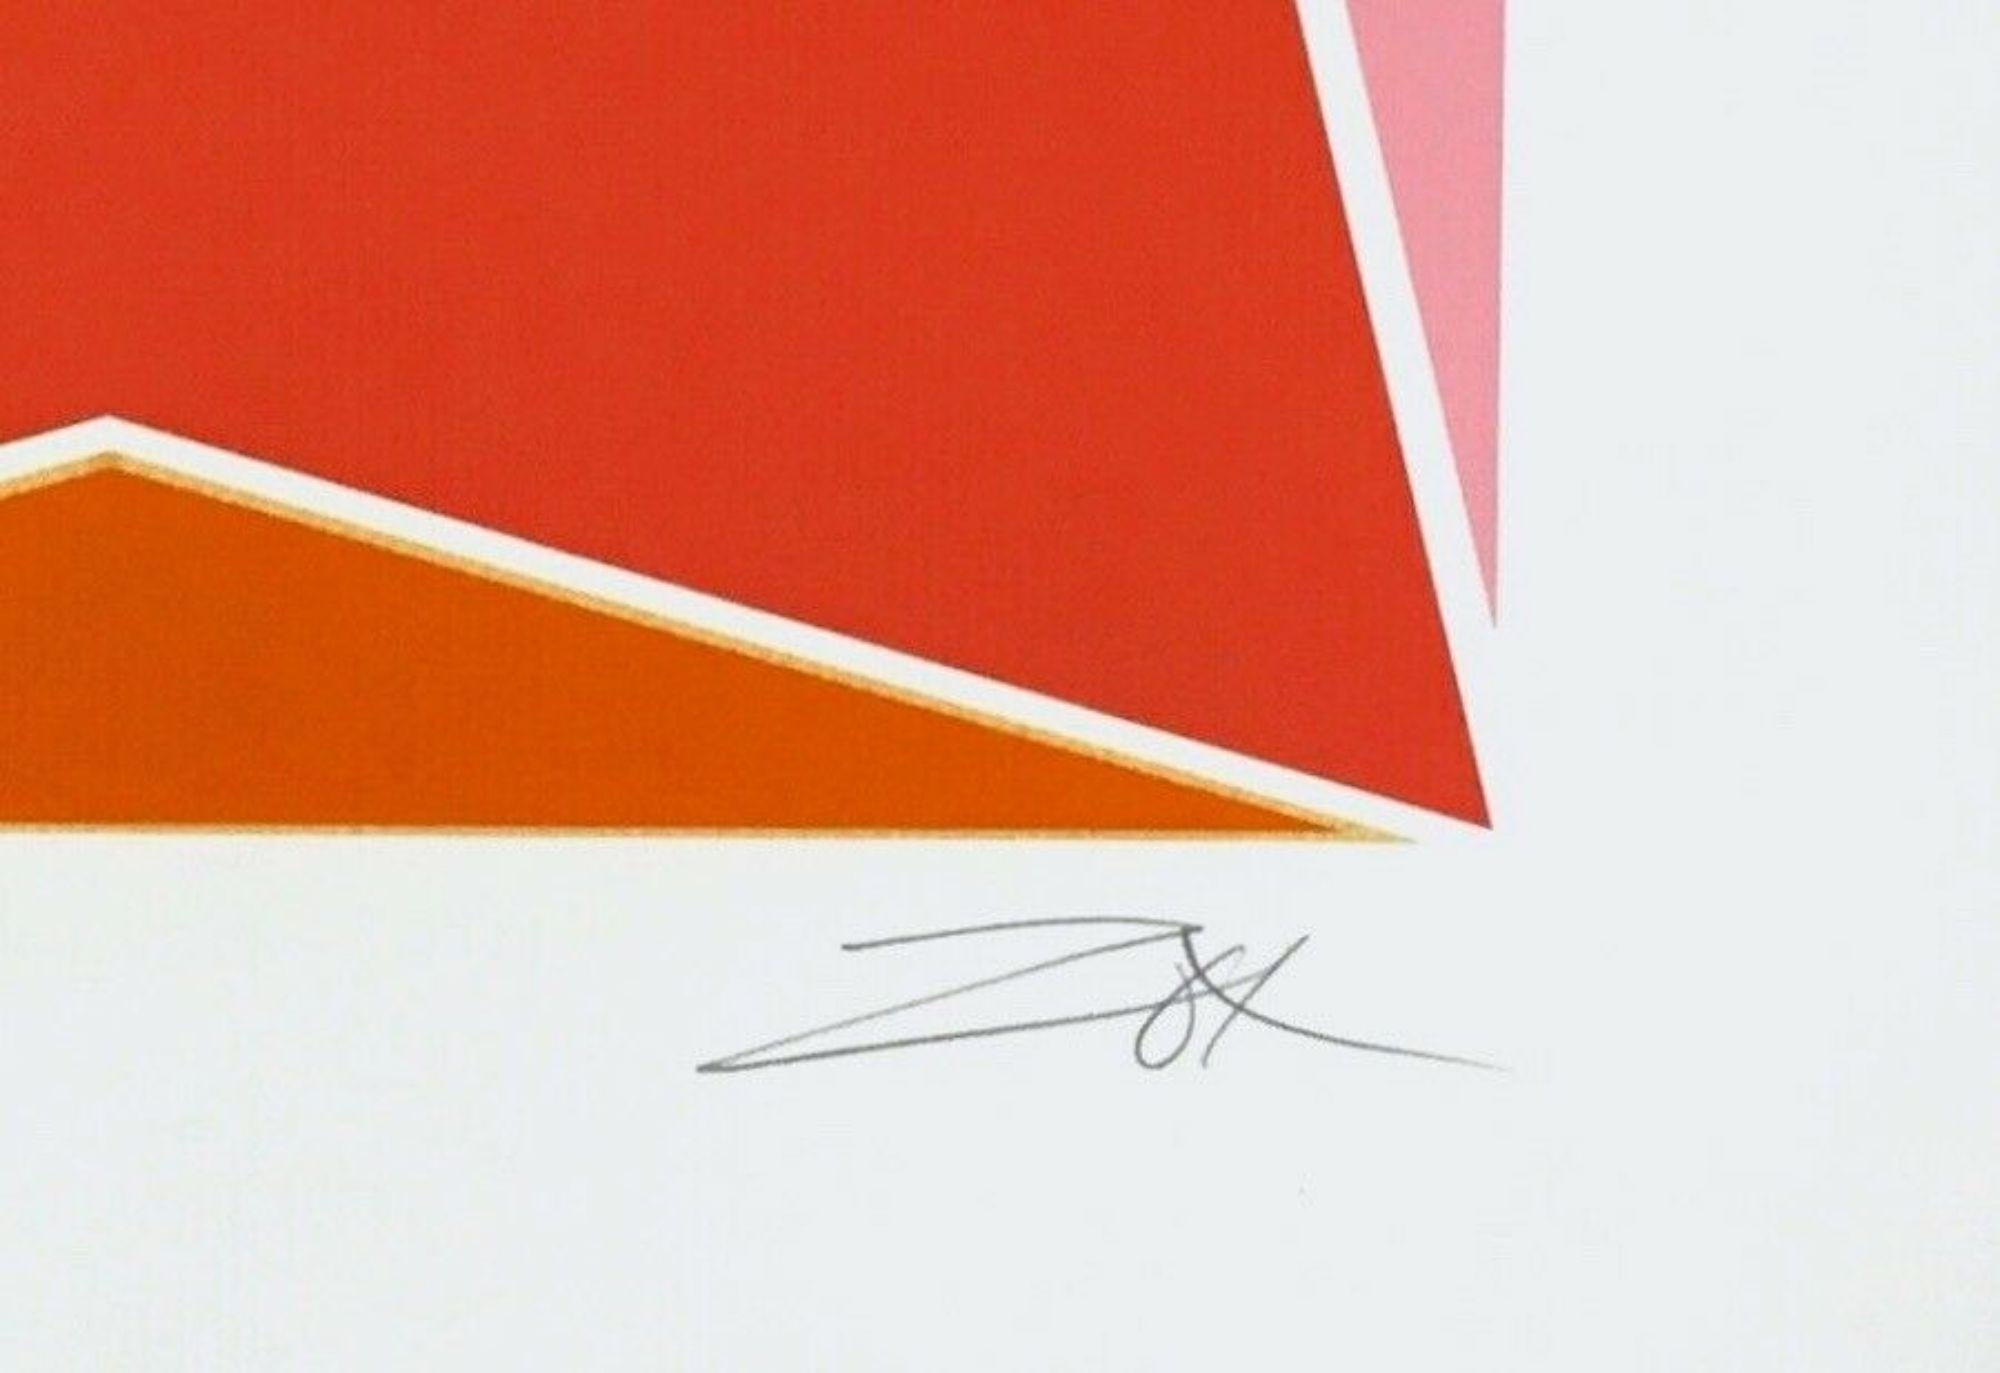 Three Square Composition, Limited Edition Silkscreen, Larry Zox - LARGE 1